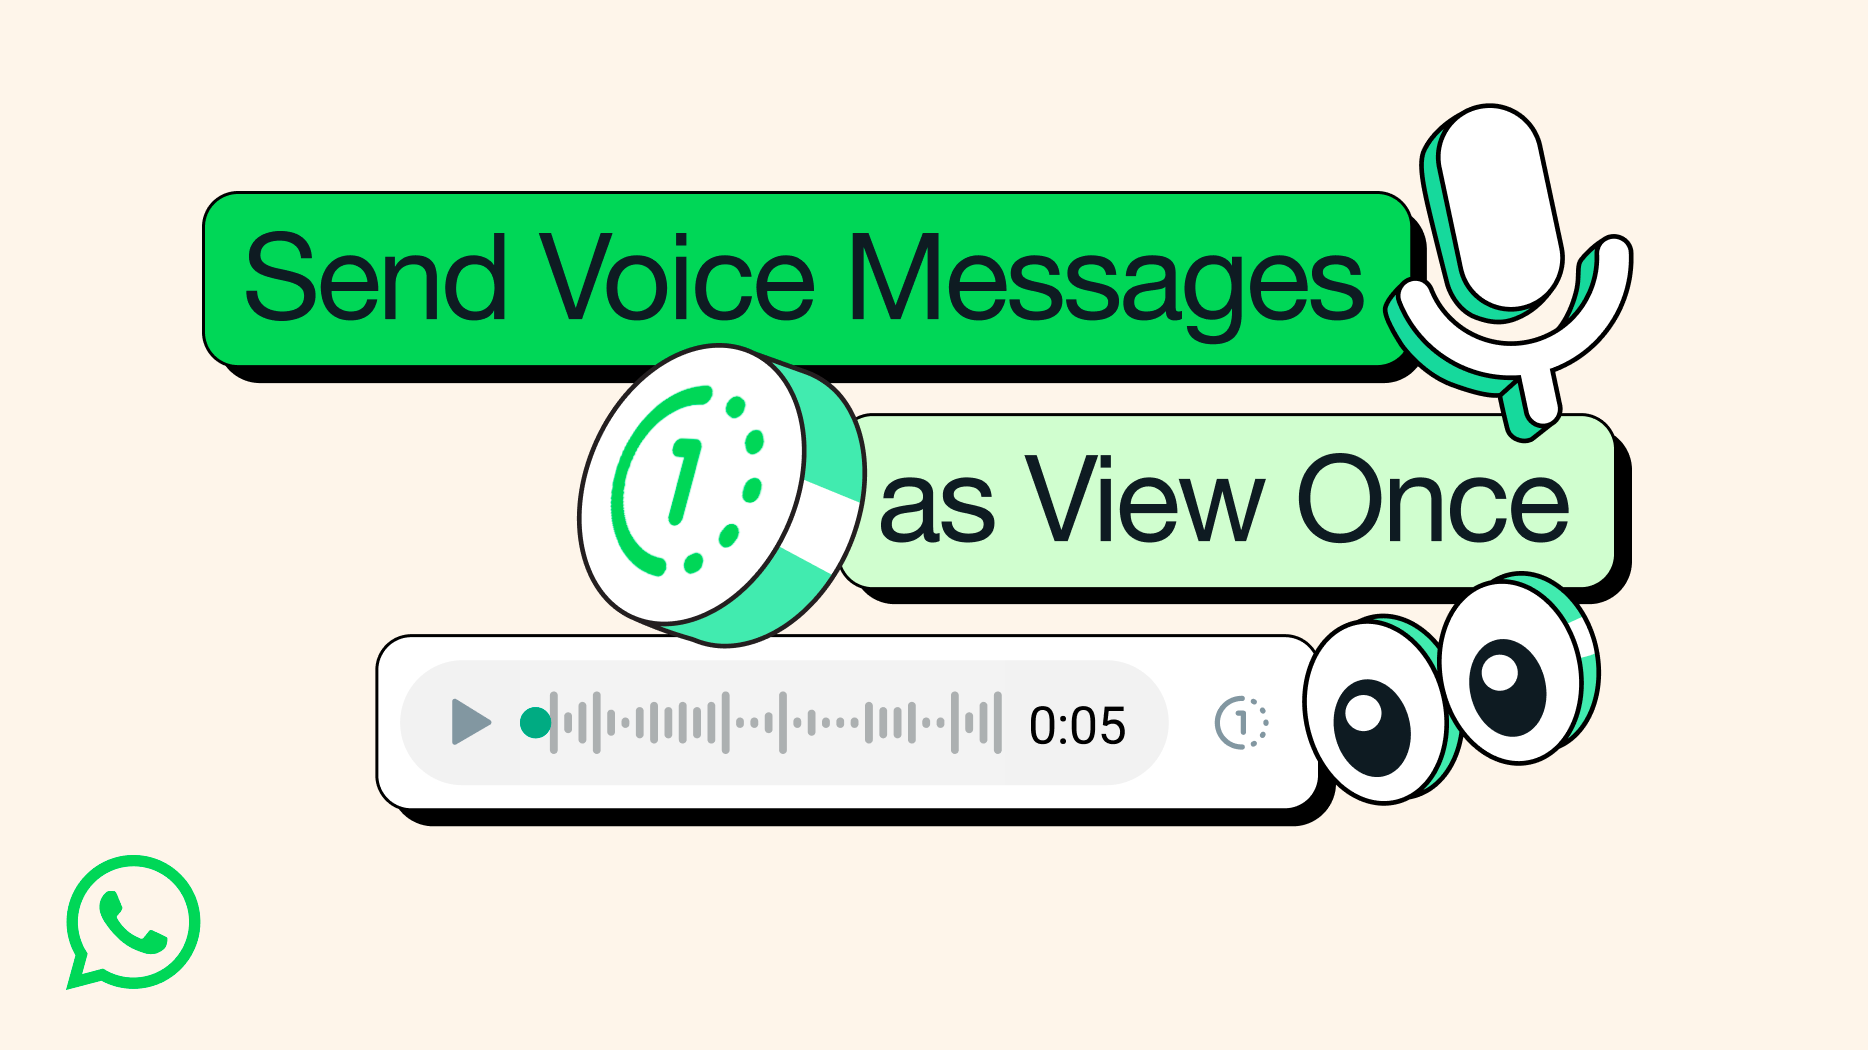 whatsapp graphic shows off an example of the new view once timer on a voice message